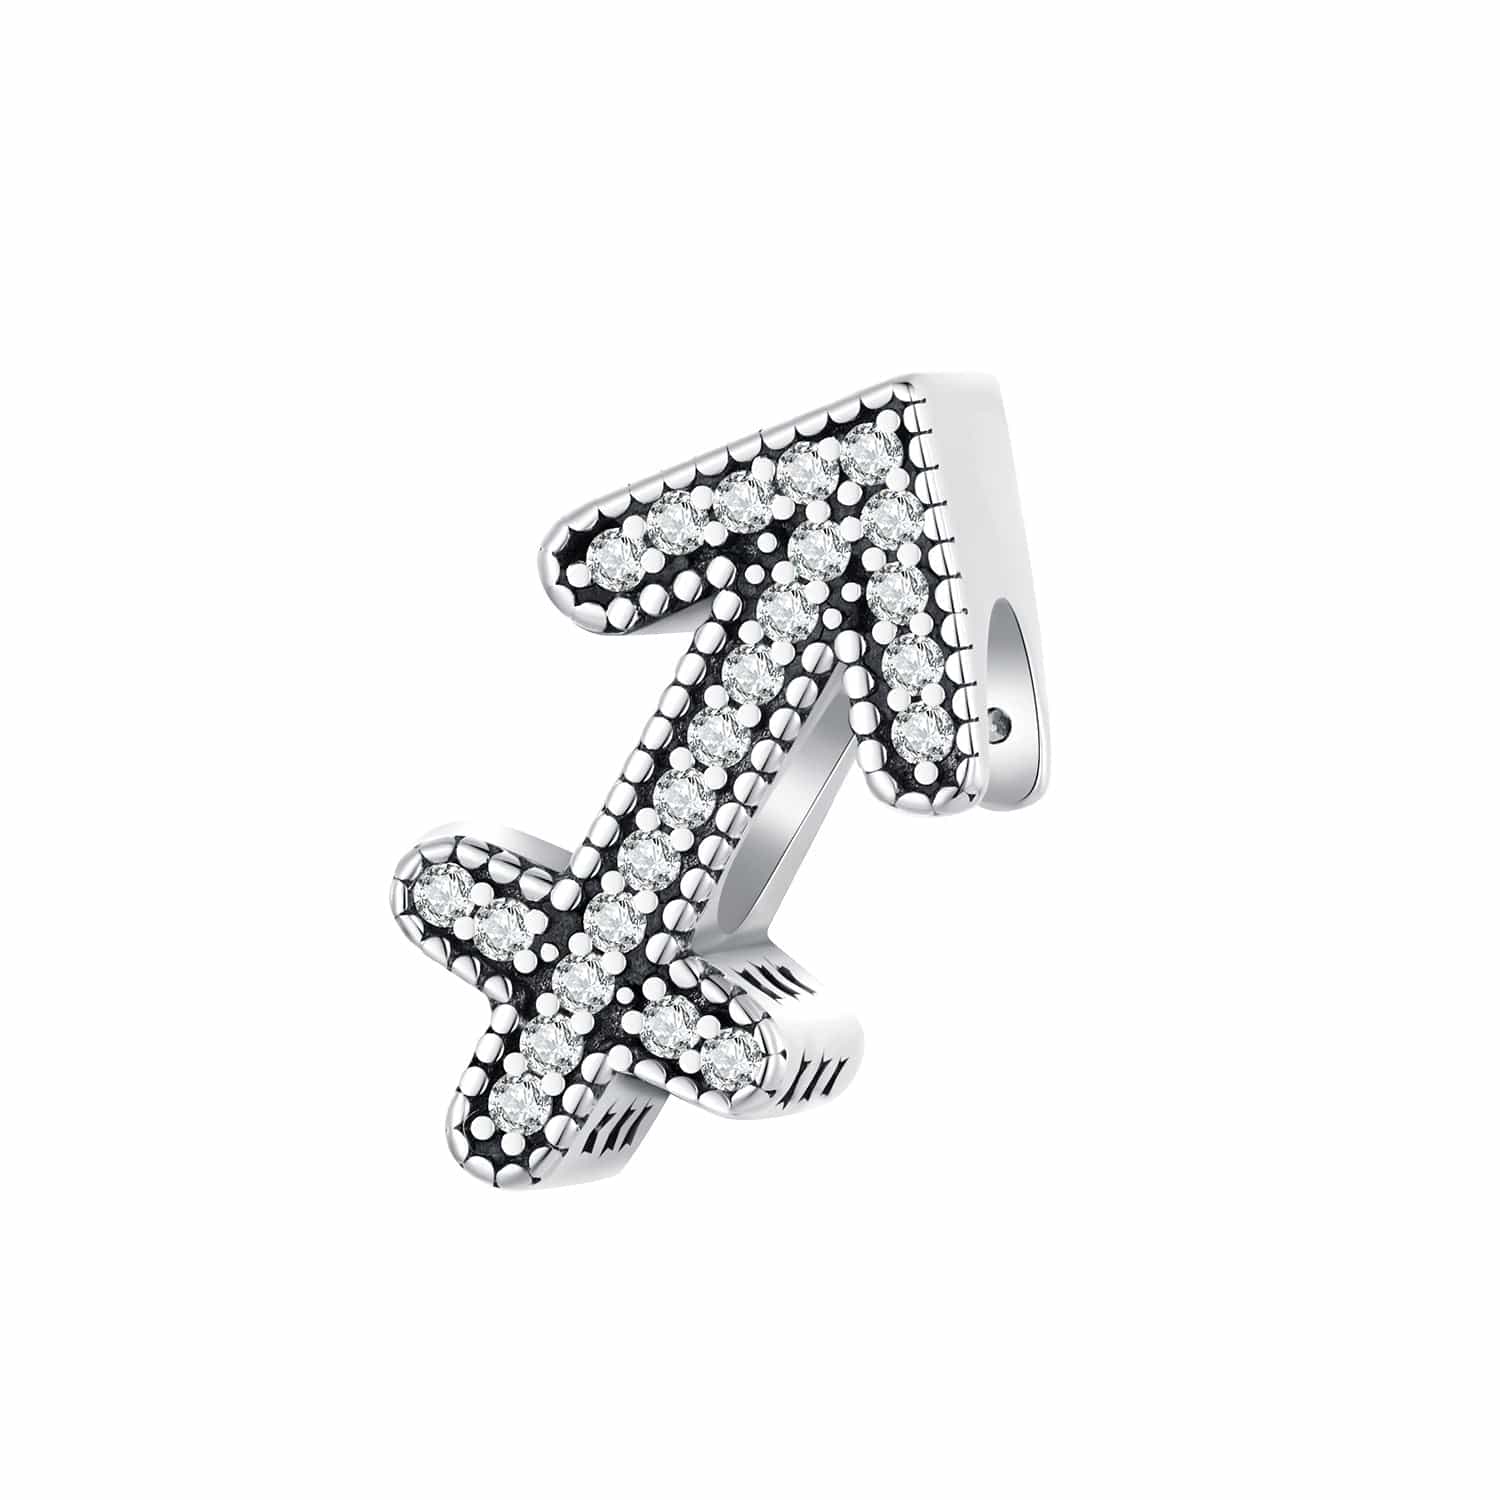 shipped in AUS CHARMS Star Sign Sagittarius Charm